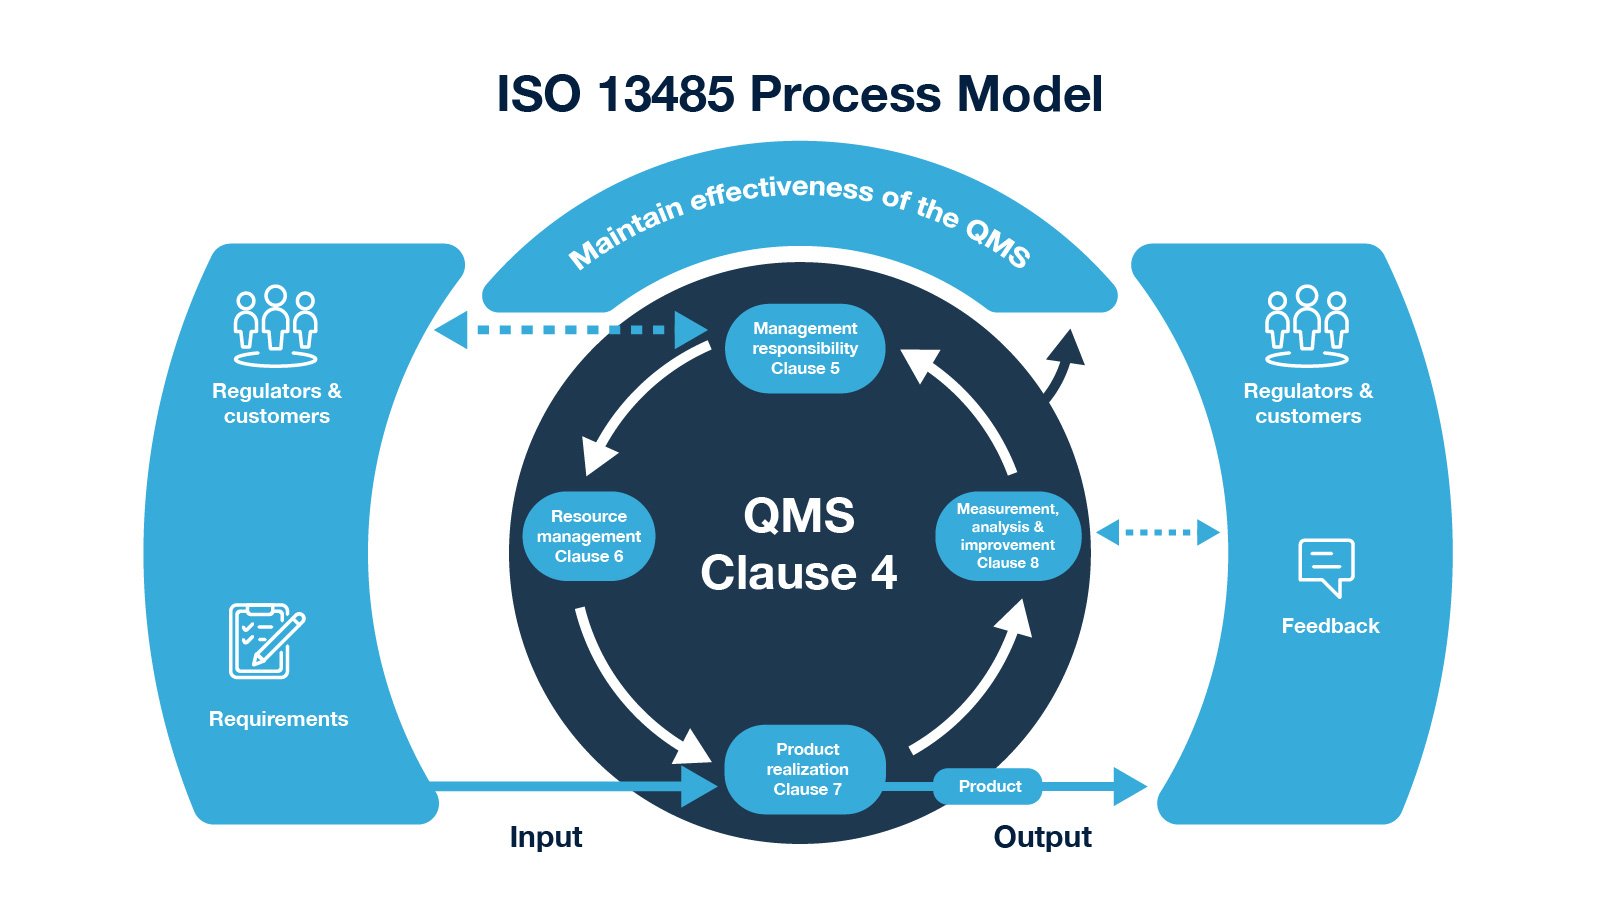 iso 13485 requirements